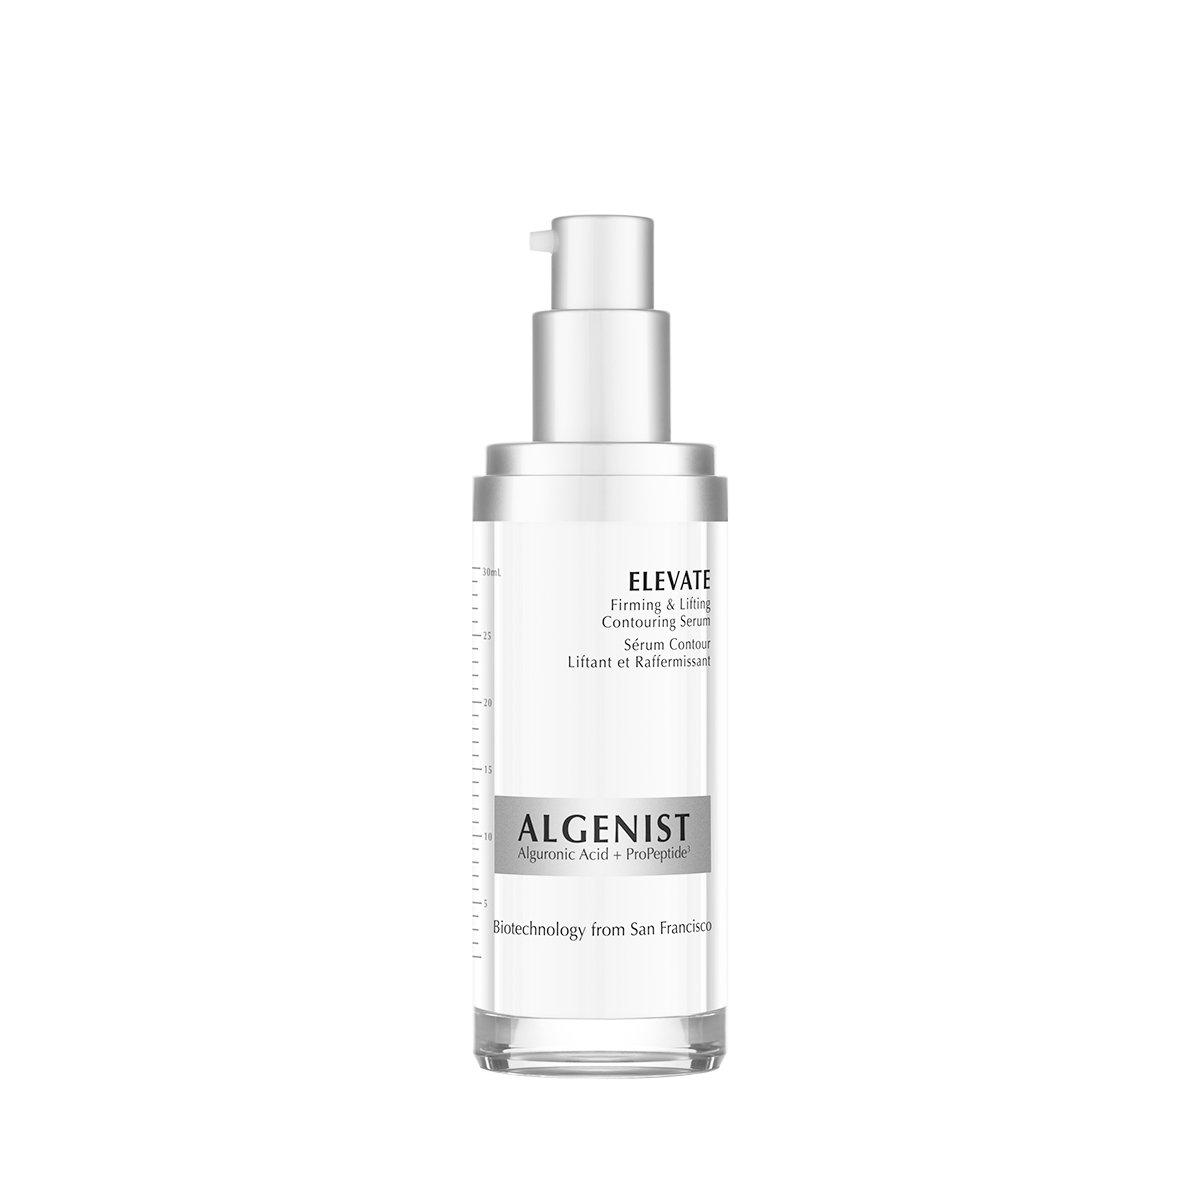 ELEVATE Firming & Lifting Contouring Serum